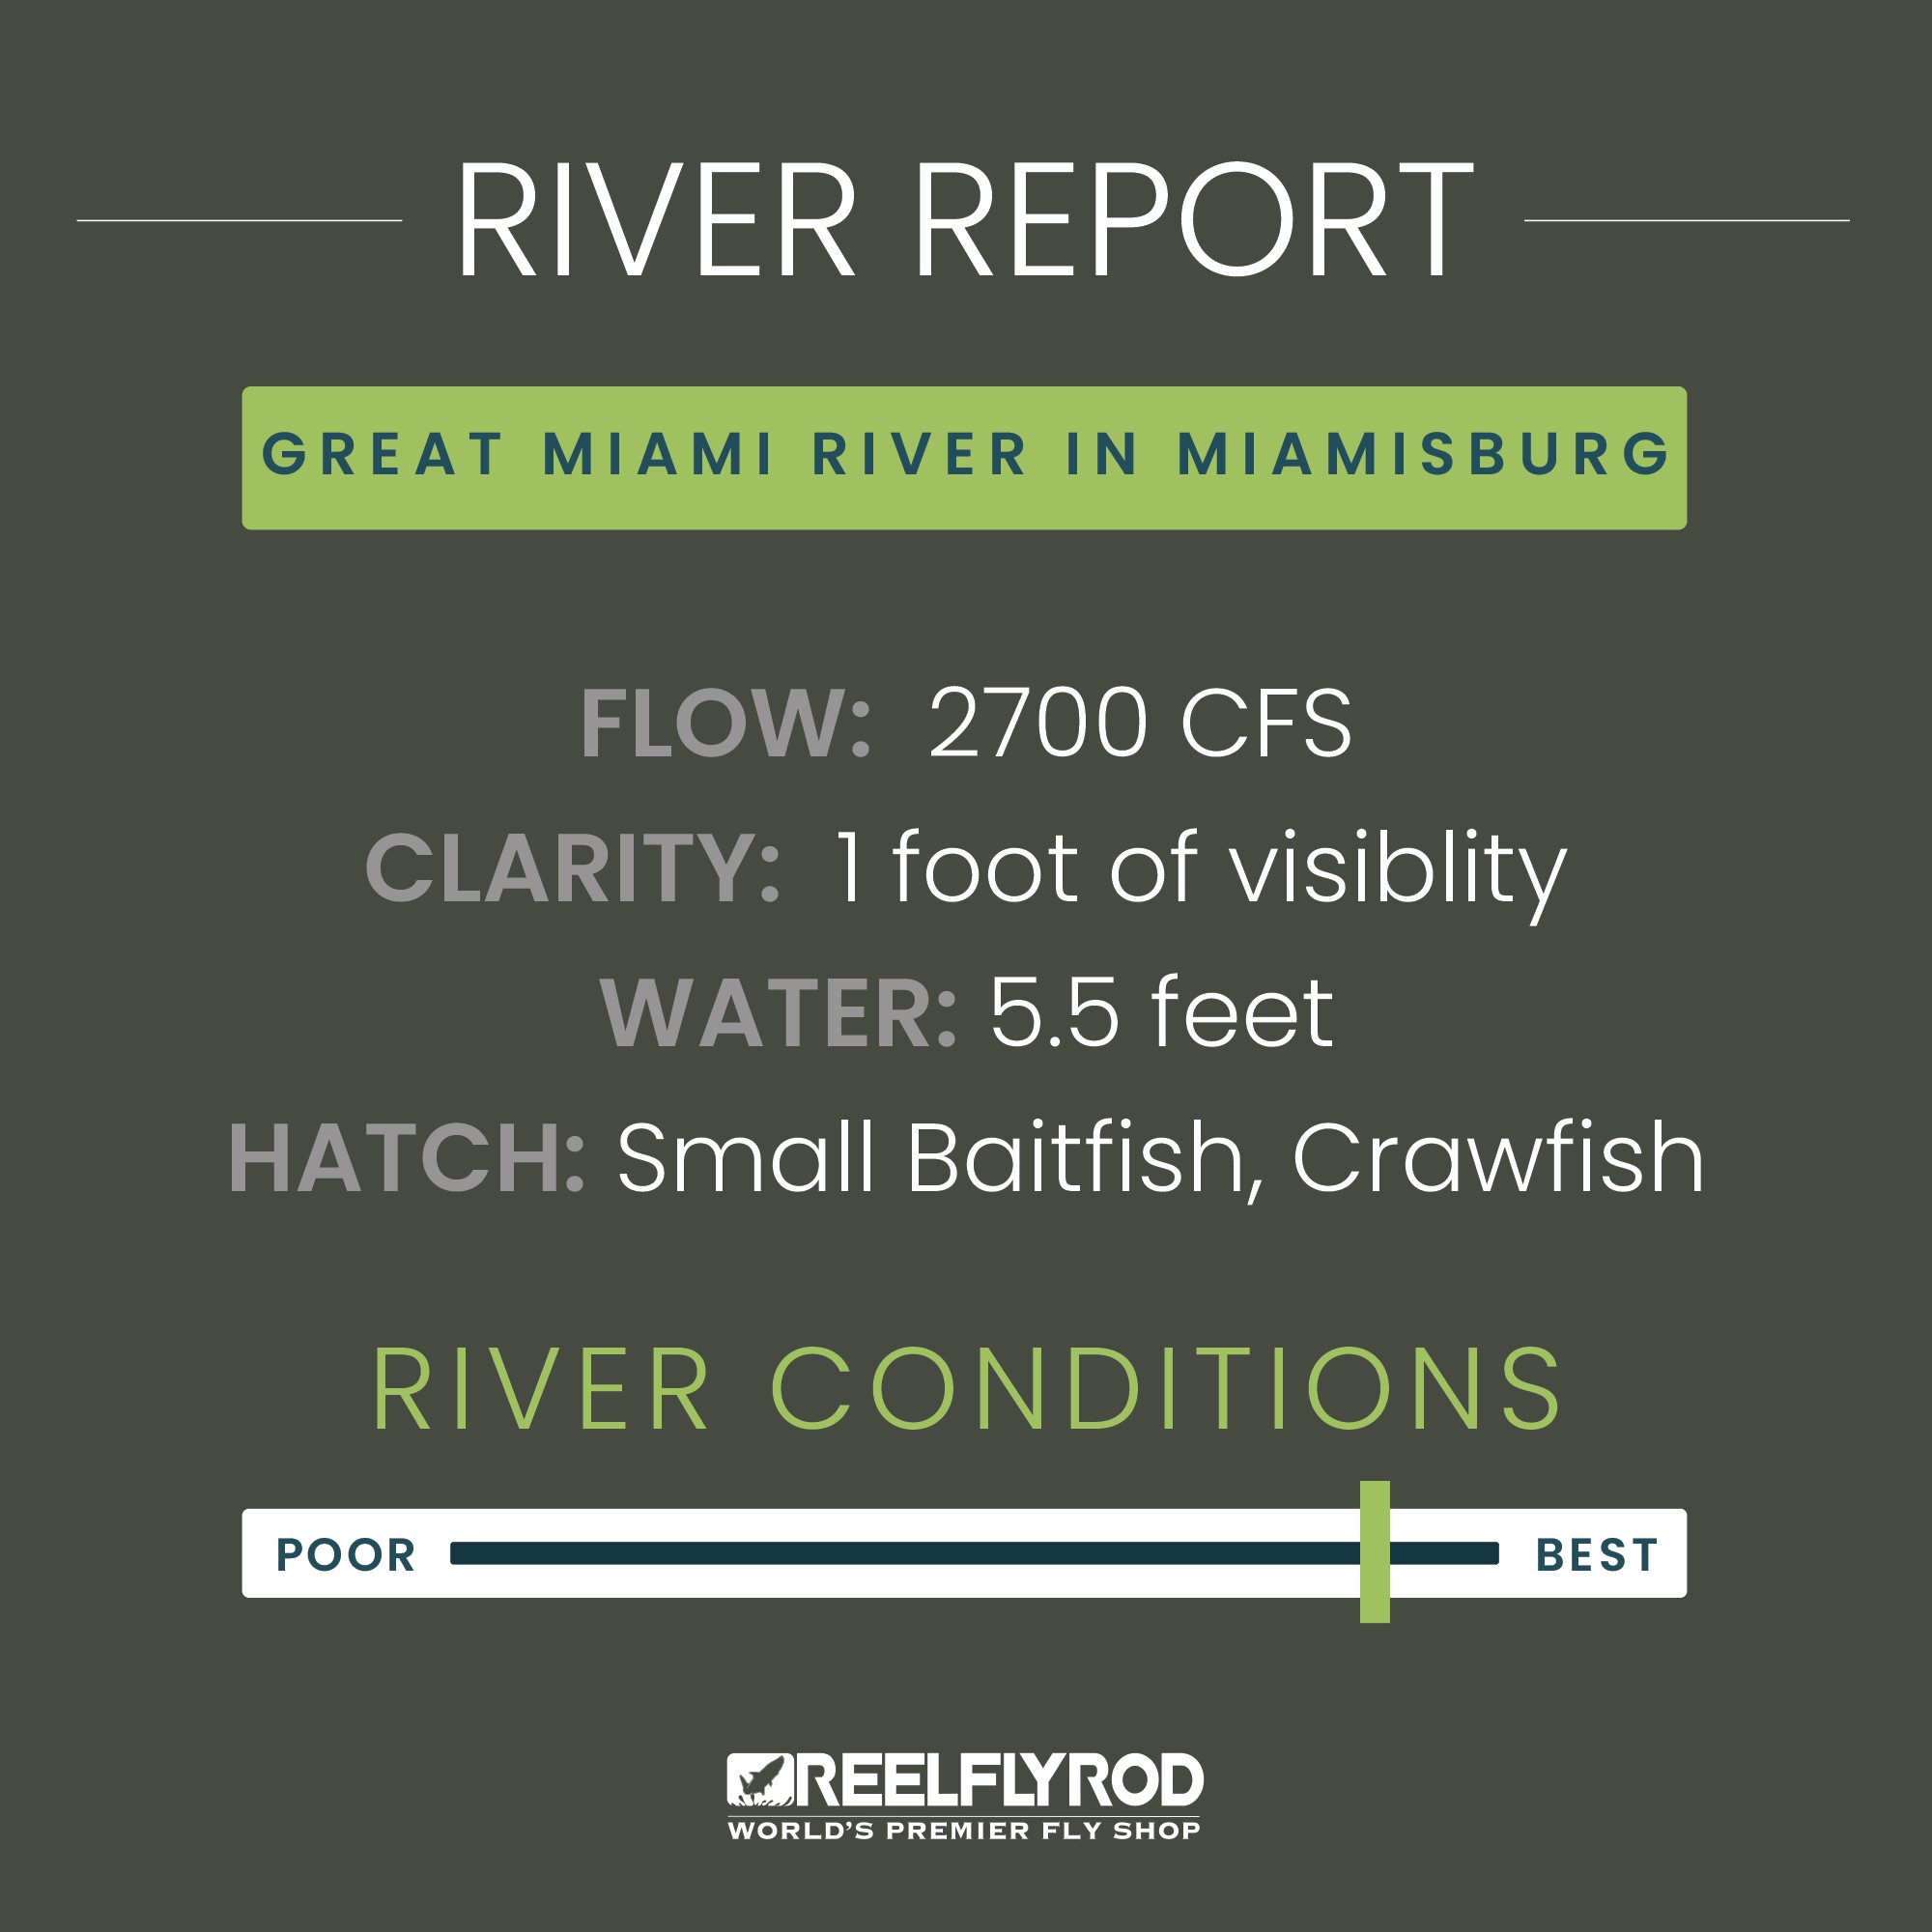 Fishing Report for the Great Miami River showing the Flow Rate, Clarity, Water Quality and Current Hatch